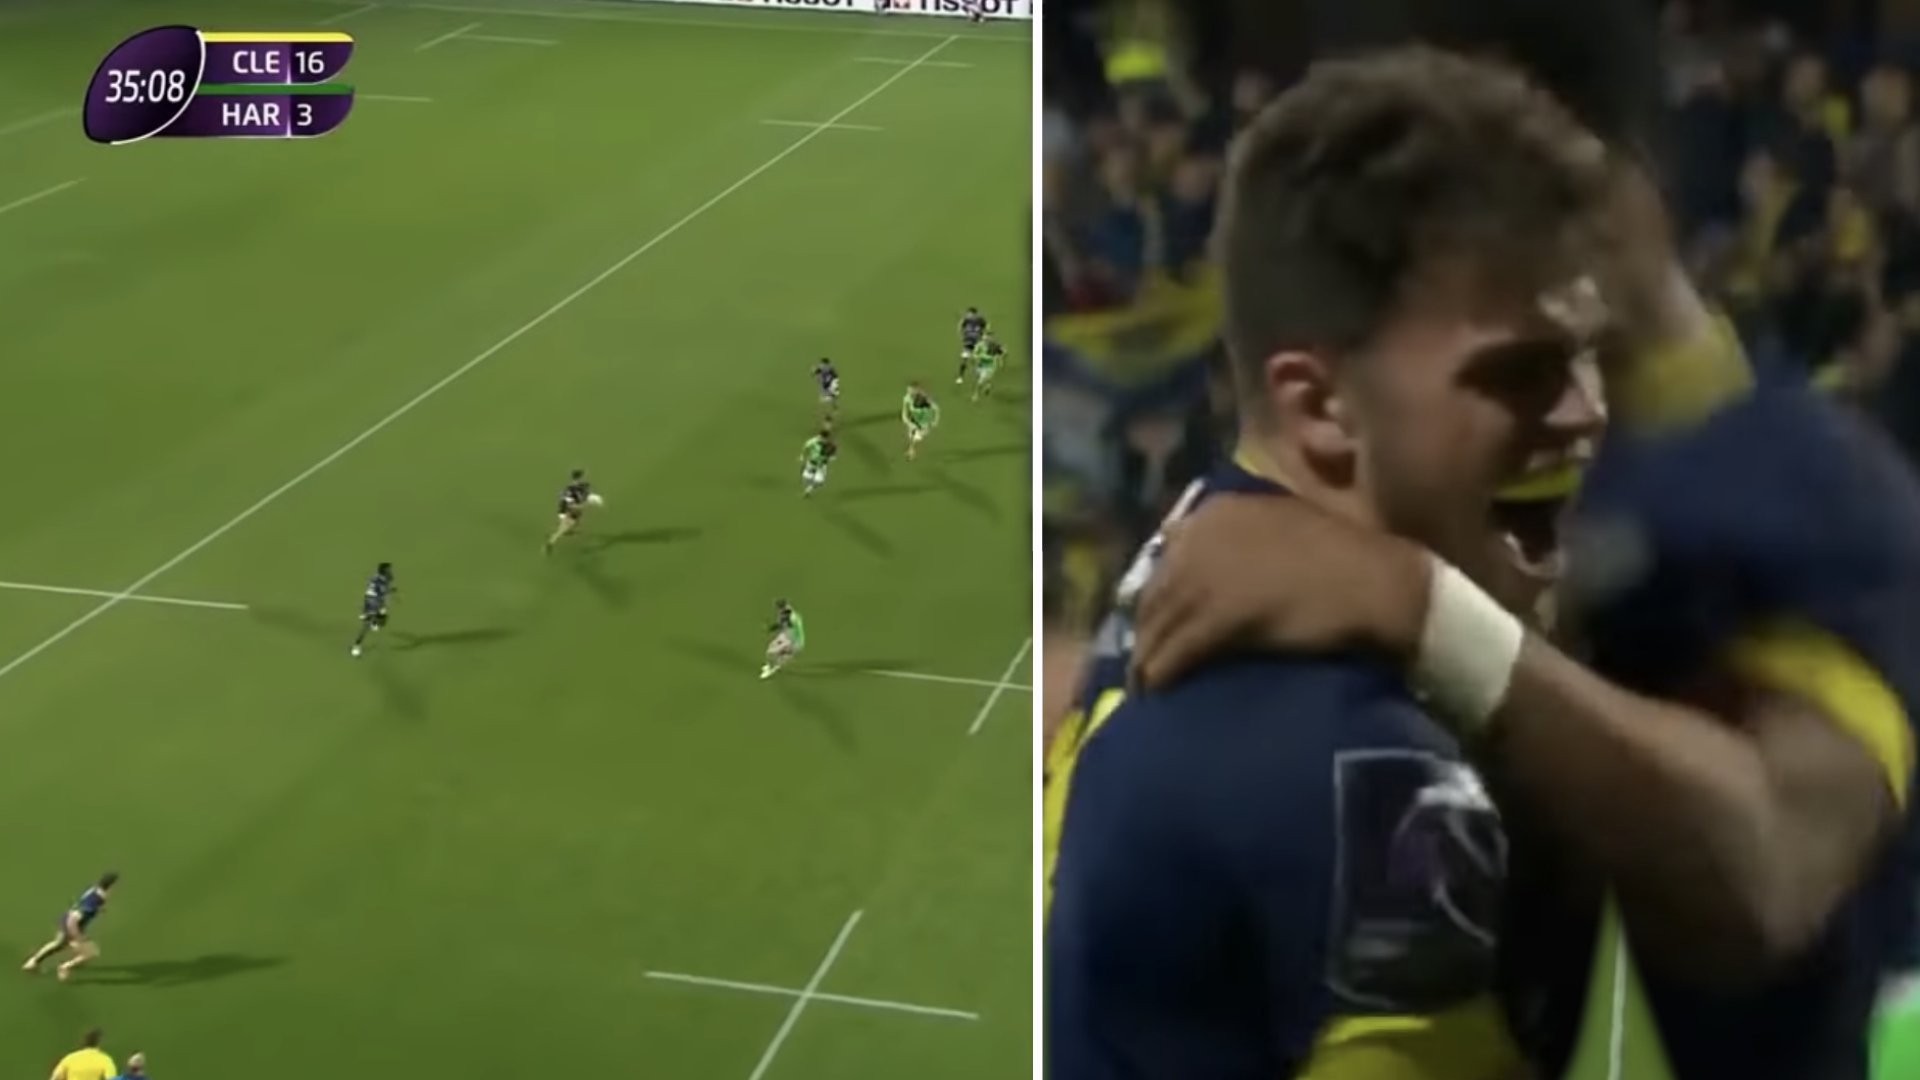 WATCH: Not many people have seen the outrageous solo try that Damian Penaud scored this weekend